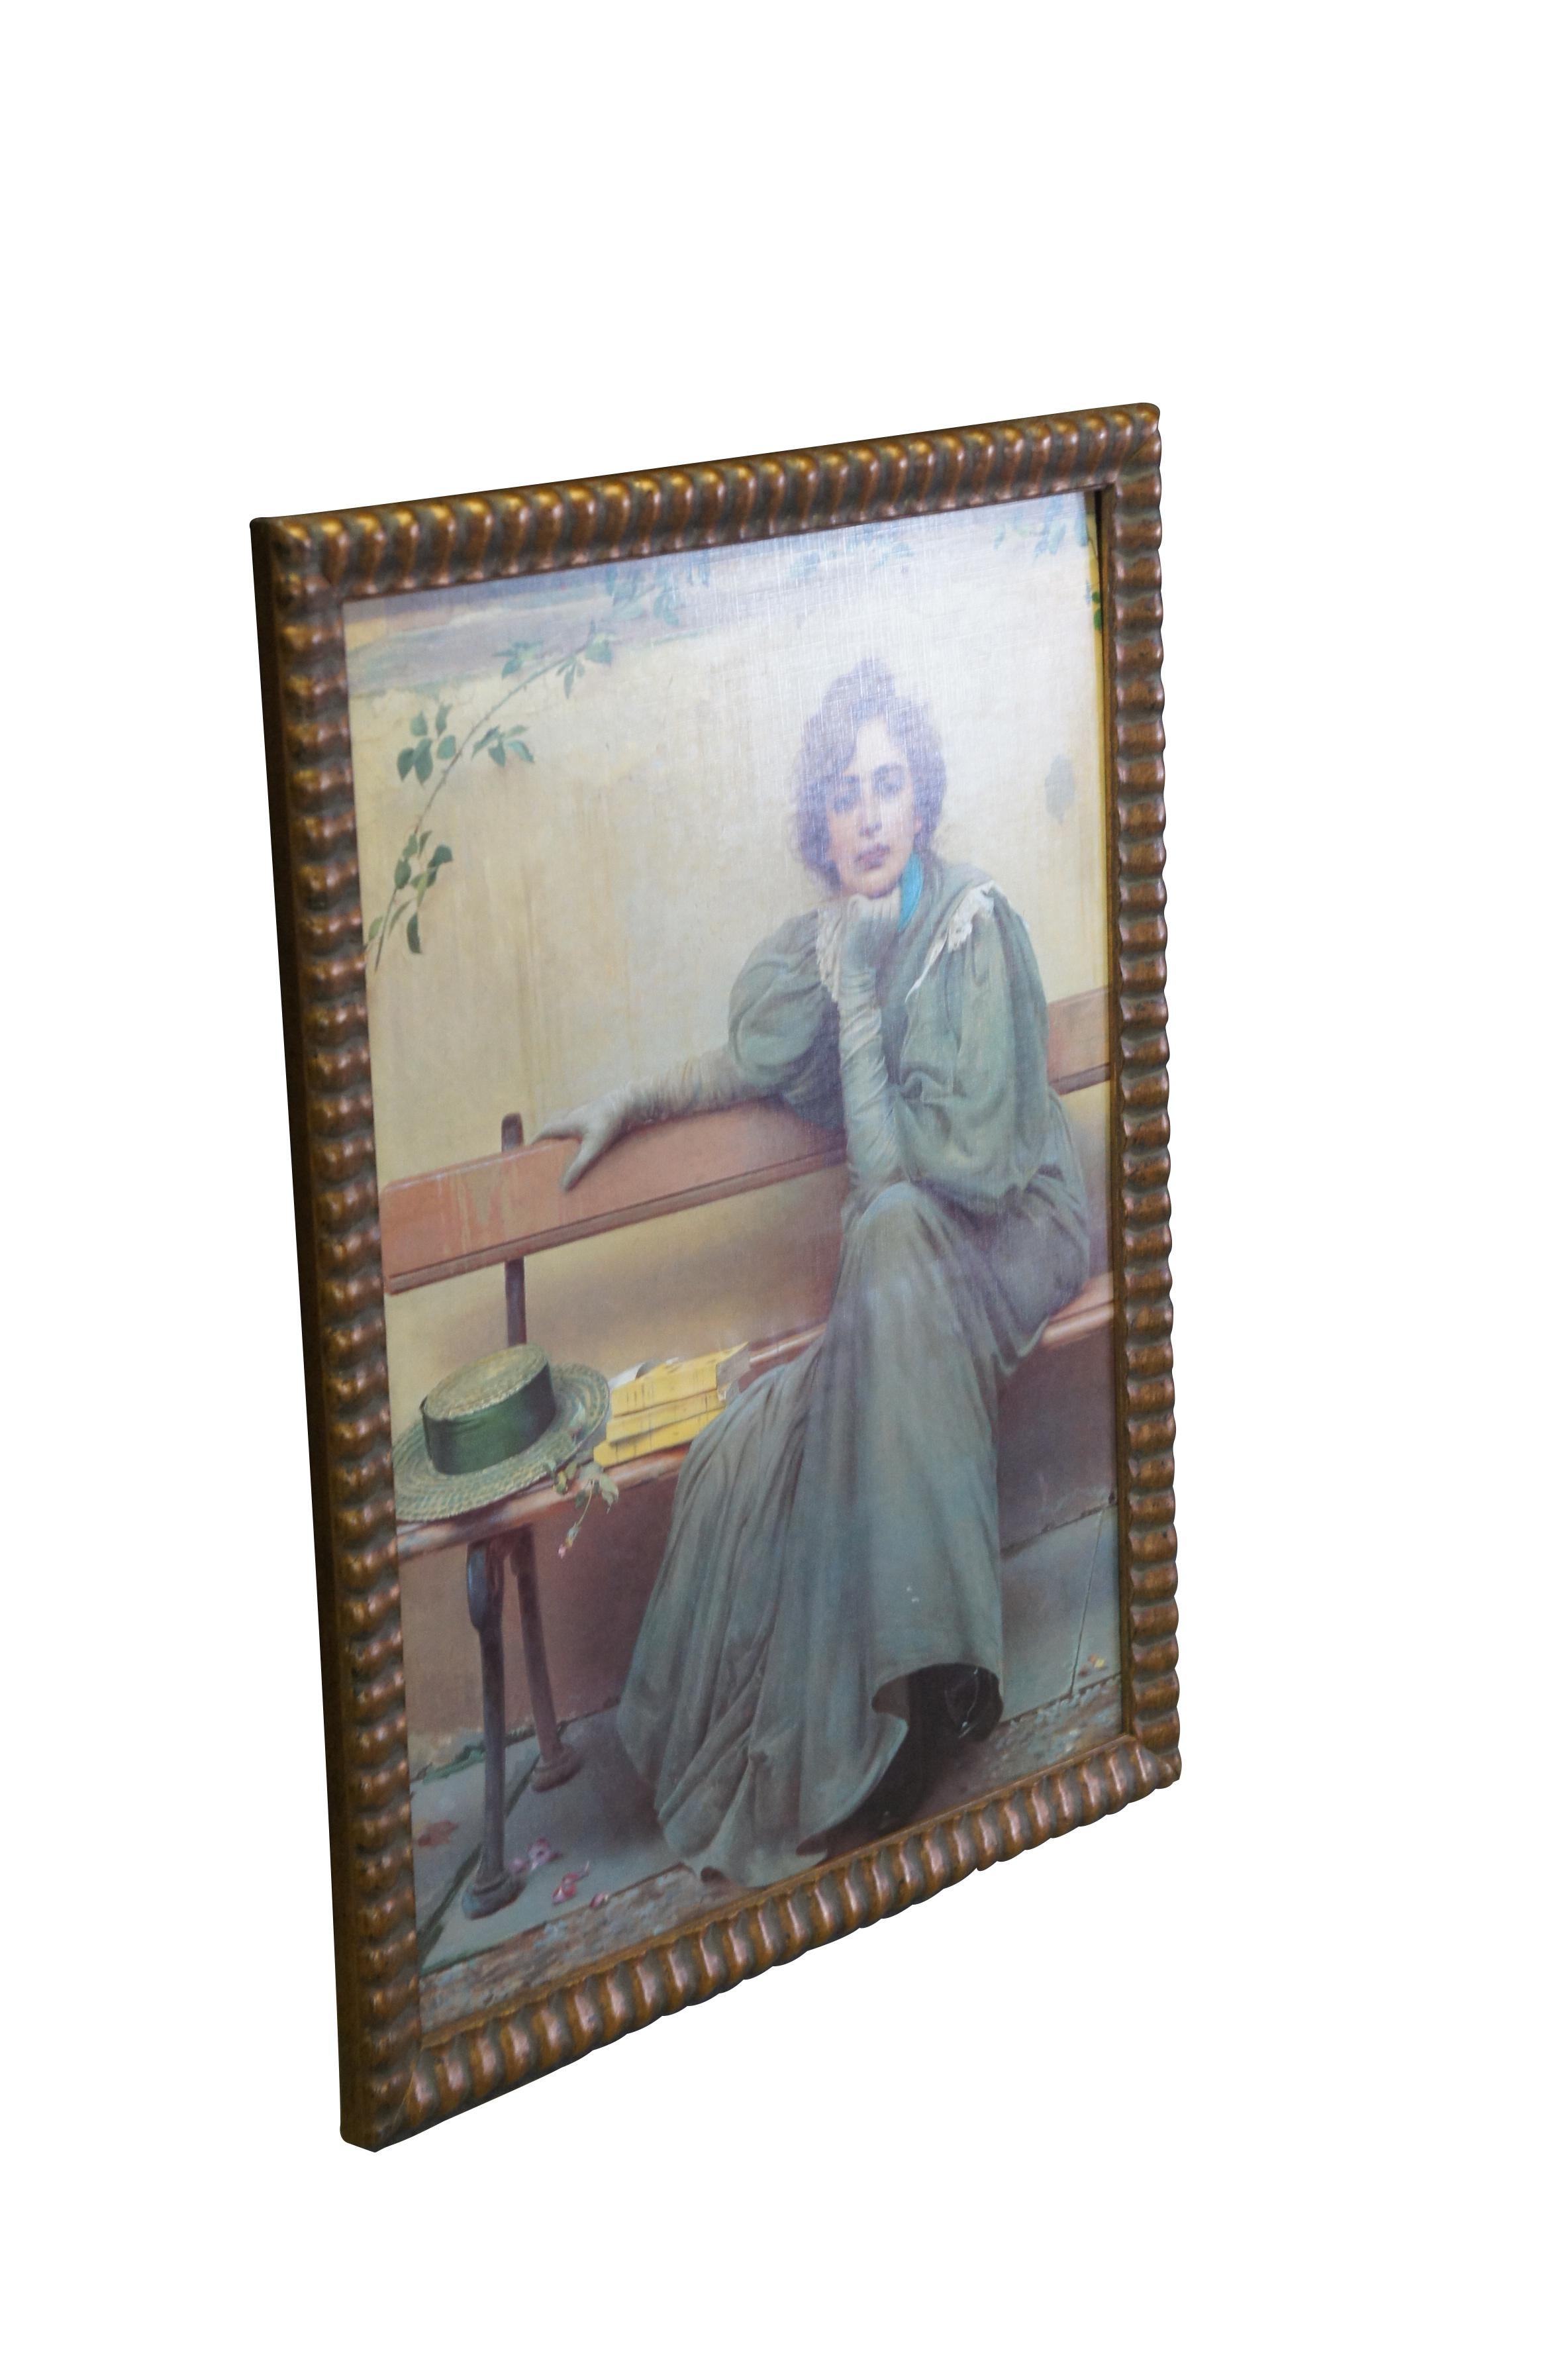 Vintage framed print on board of Dreams by Vittorio Matteo Corcos, originally painted in 1896.  Features a woman in Victorian attire sitting on a bench next to her books and hat, dreaming / stairing into the distance. 

Vittorio Matteo Corcos (4